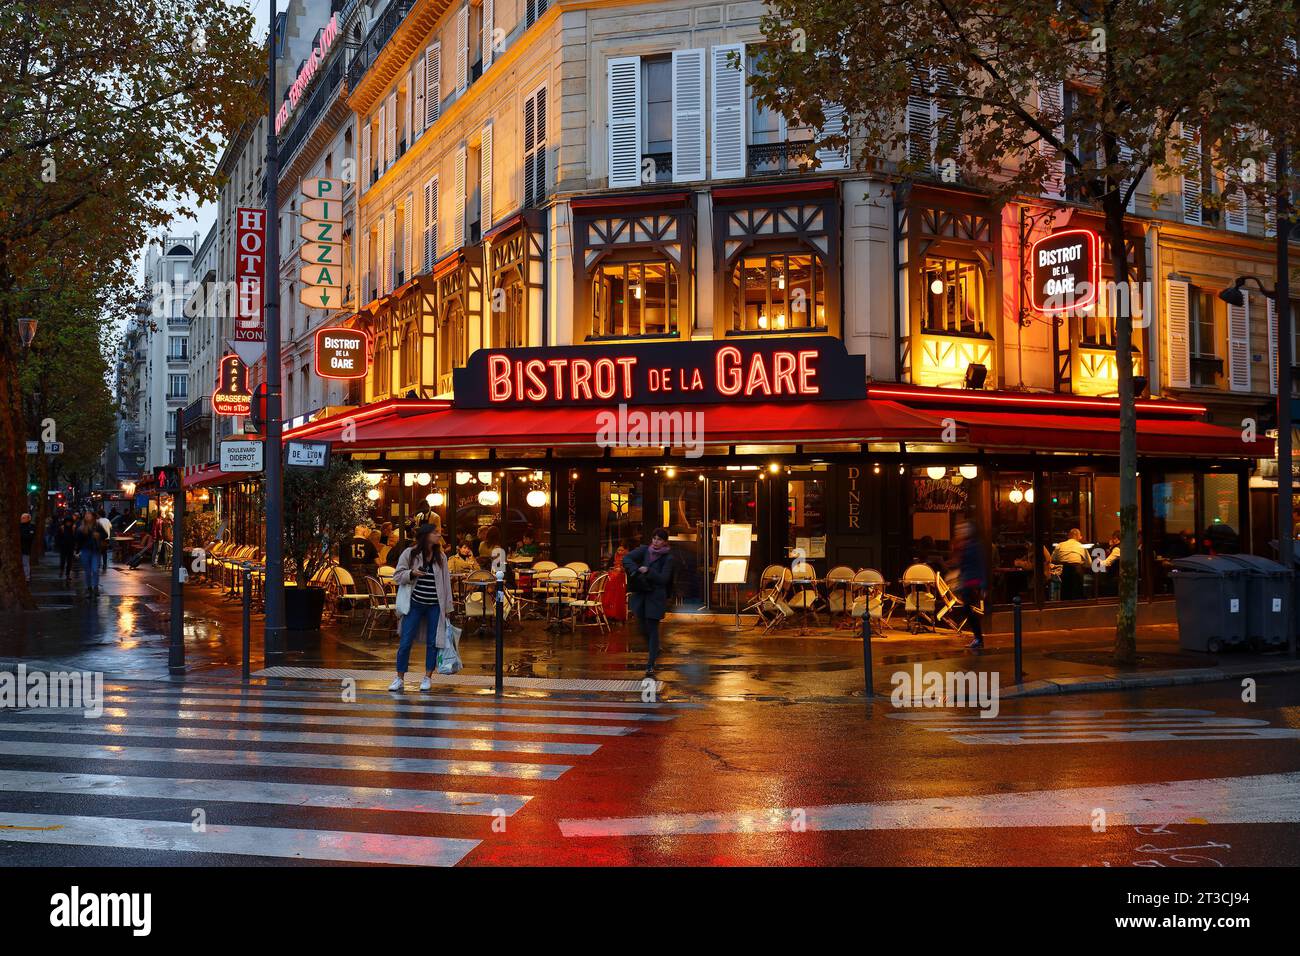 The Bistrot de la gare is traditional French restaurant located opposite the Gare de Lyon railway station , a 5-minute walk from the Opera Bastille Stock Photo